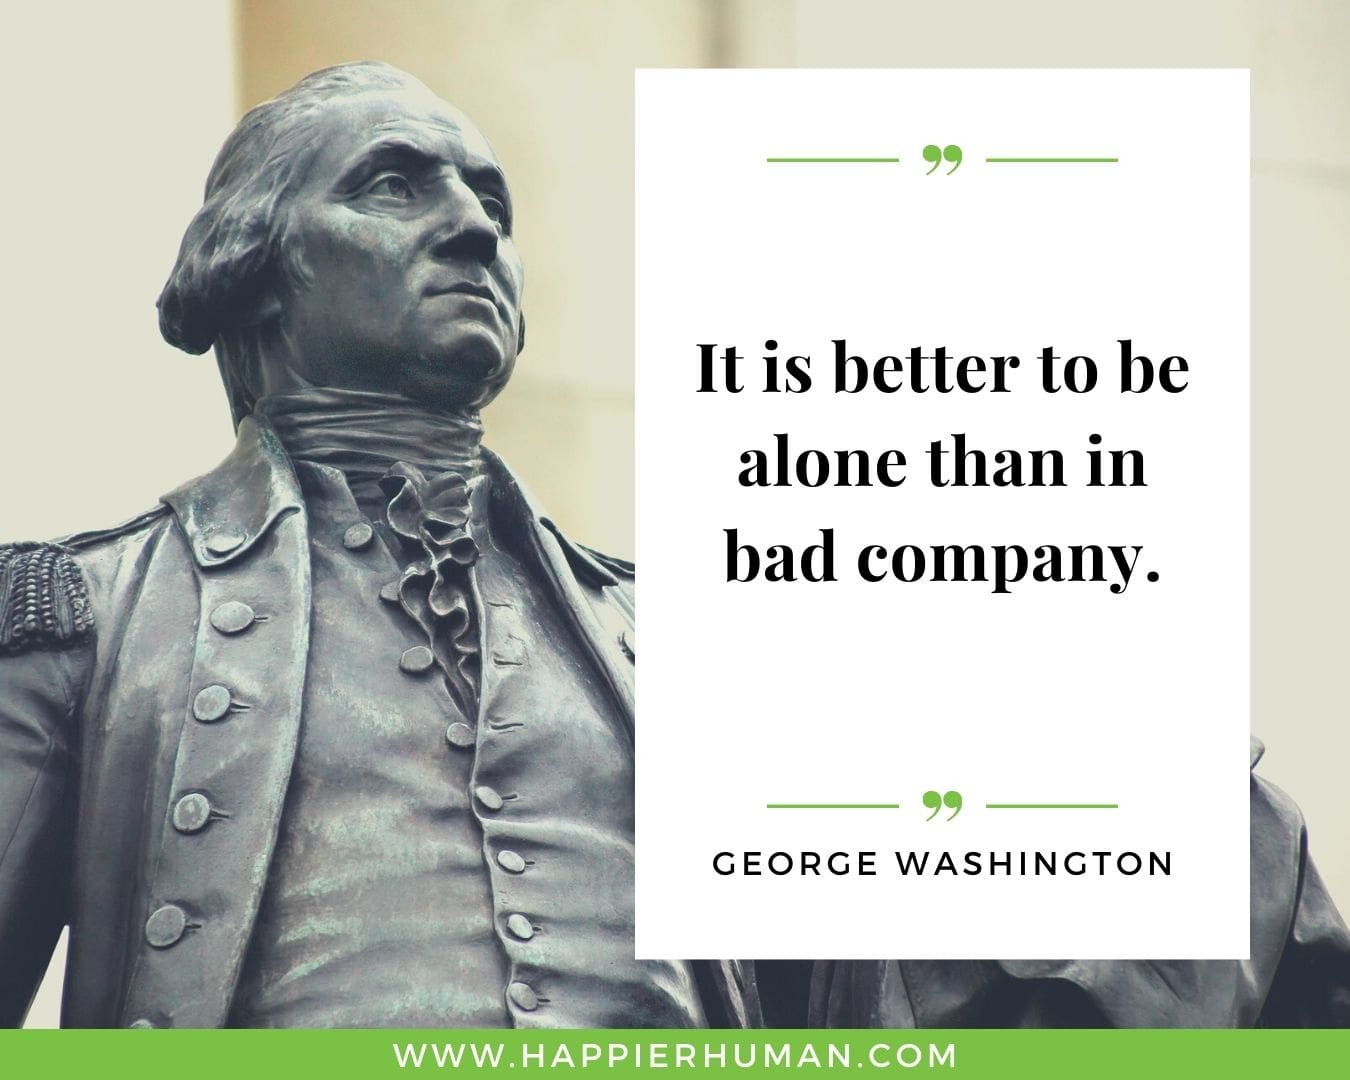 Loneliness Quotes - “It is better to be alone than in bad company.” – George Washington